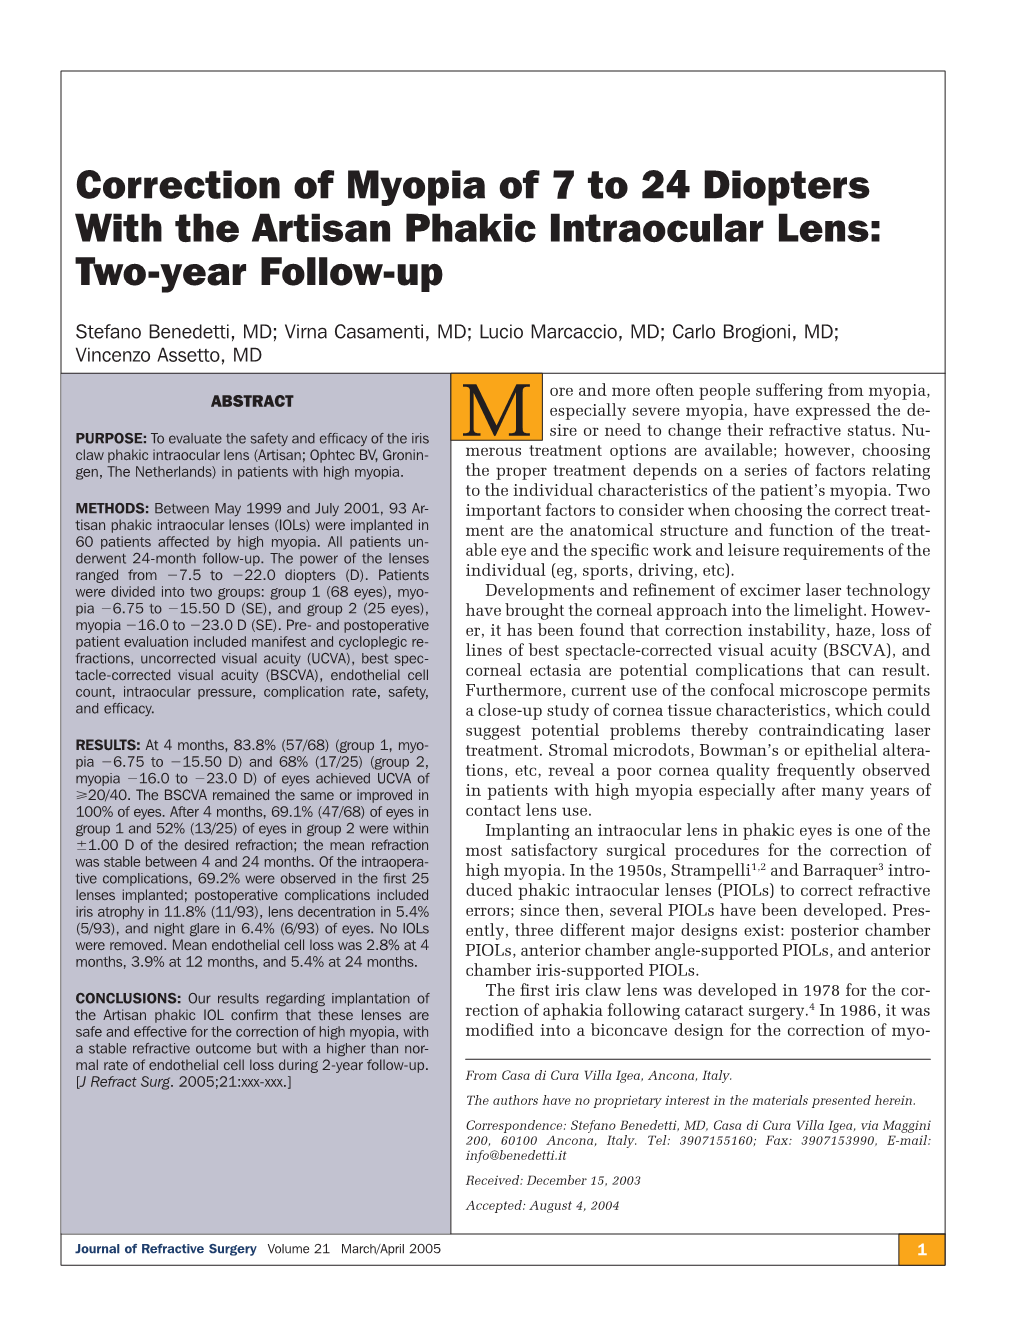 Correction of Myopia of 7 to 24 Diopters with the Artisan Phakic Intraocular Lens: Two-Year Follow-Up